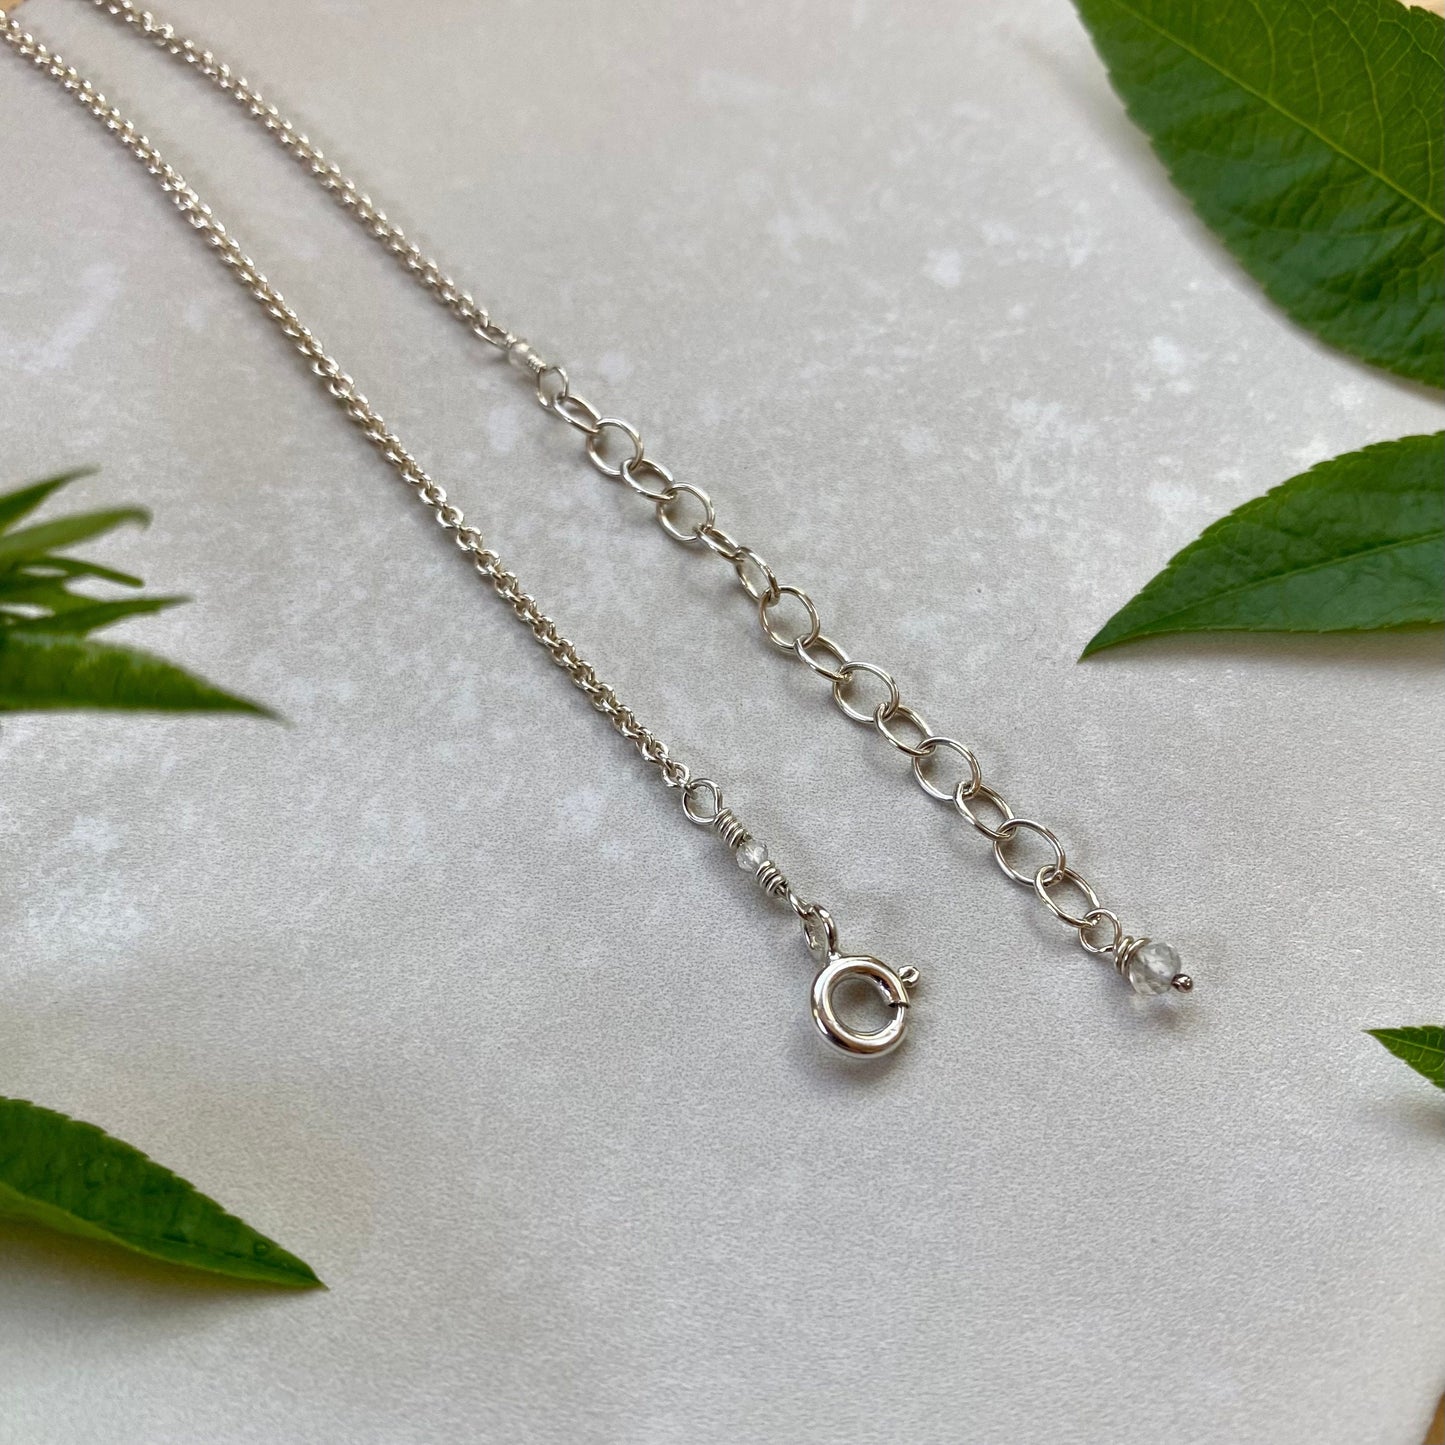 Gemstone Charm Necklace - Minimalist Version, Sterling Silver Sparkly Perfectly Imperfect Tiny Circles Pendant with Gemstone Birthstones